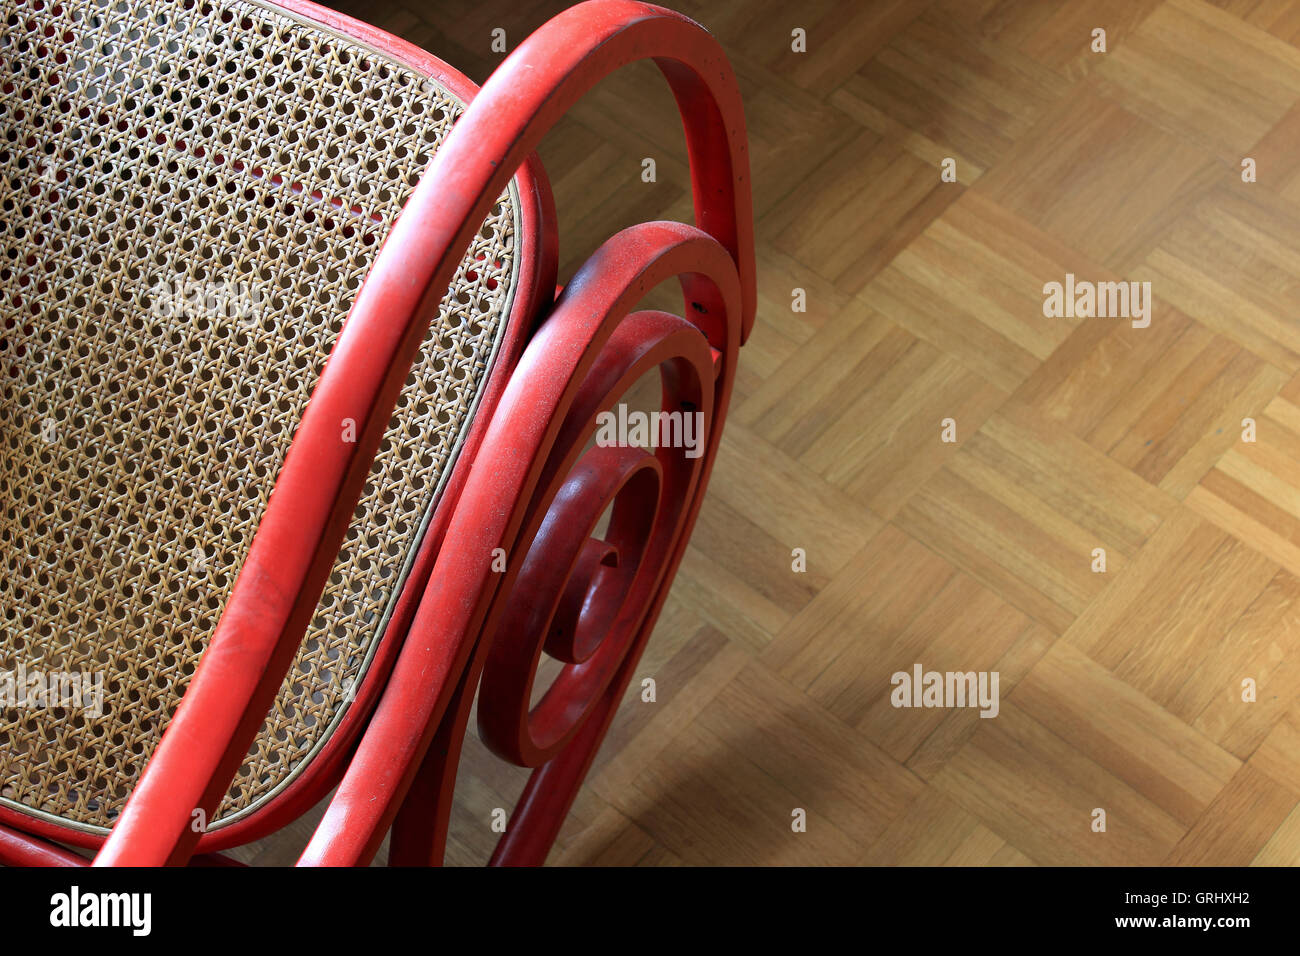 Old wooden red chair detail Stock Photo